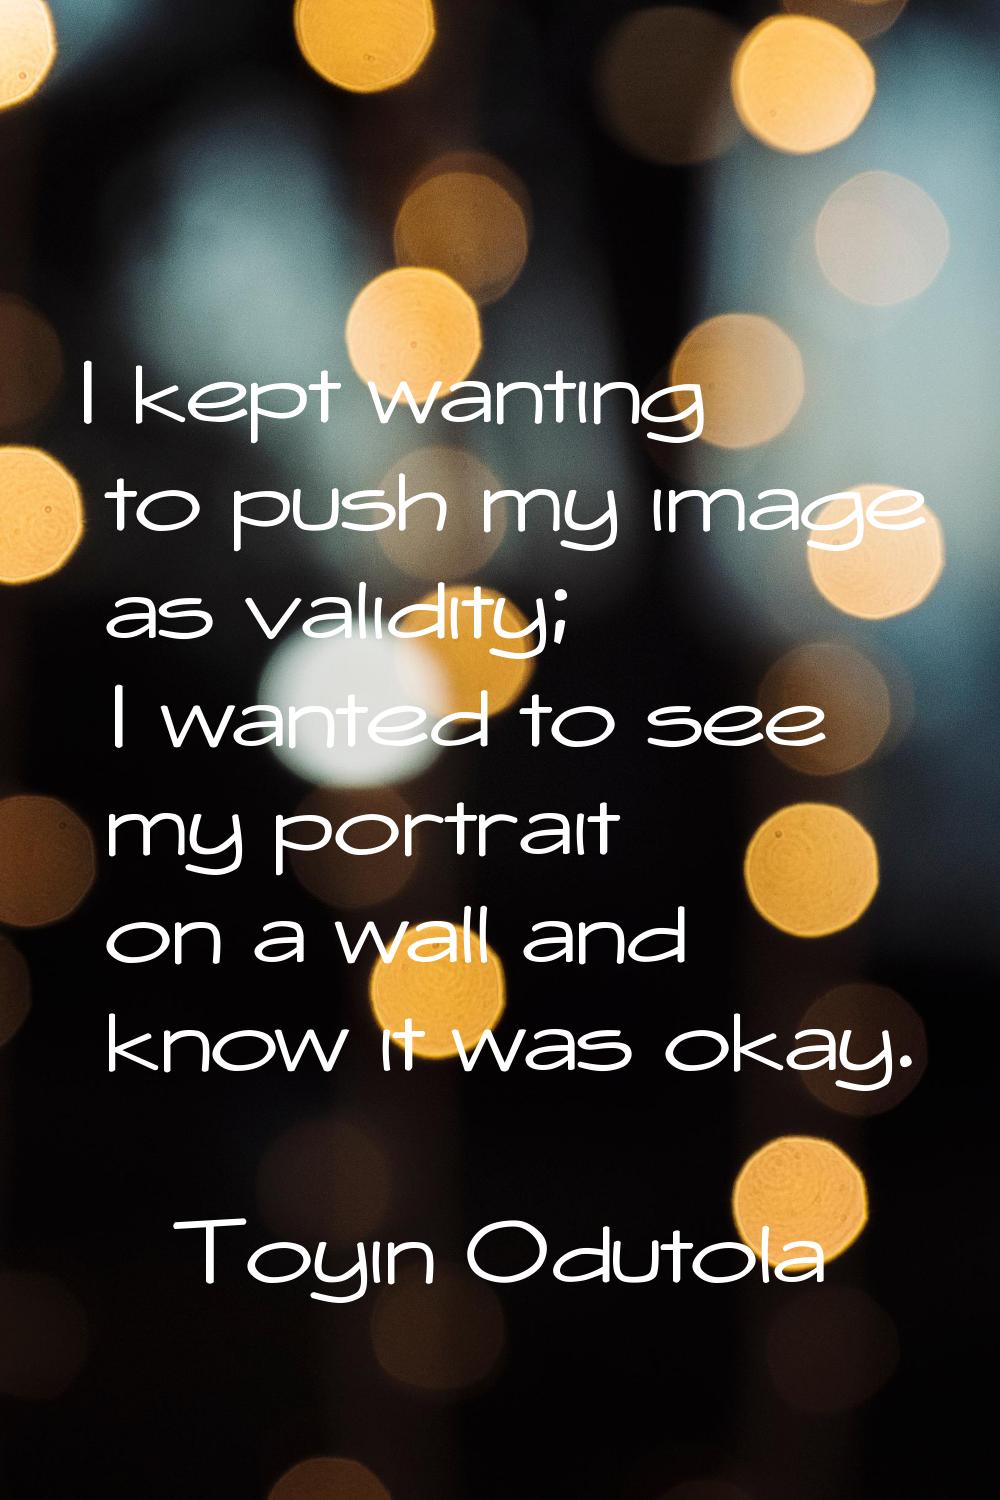 I kept wanting to push my image as validity; I wanted to see my portrait on a wall and know it was 